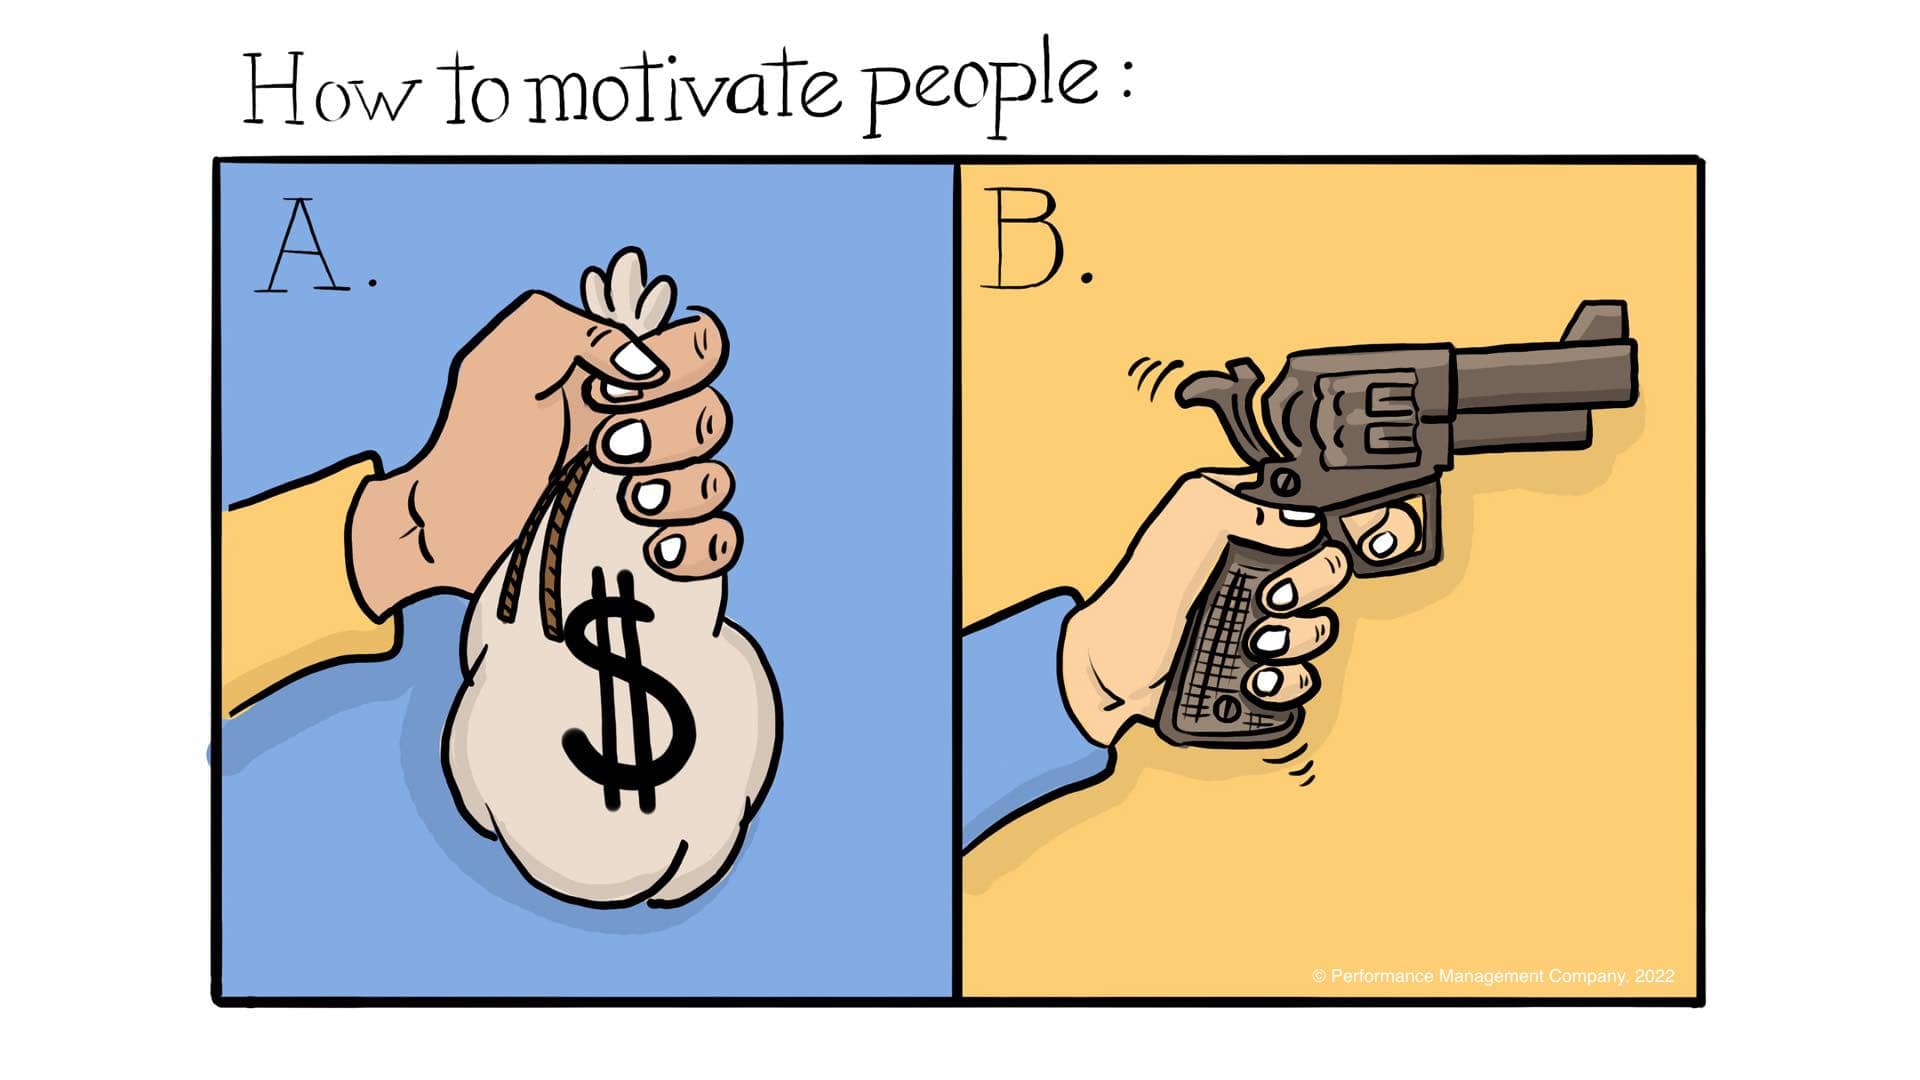 Bad ideas on how to motivate people, with money and gun